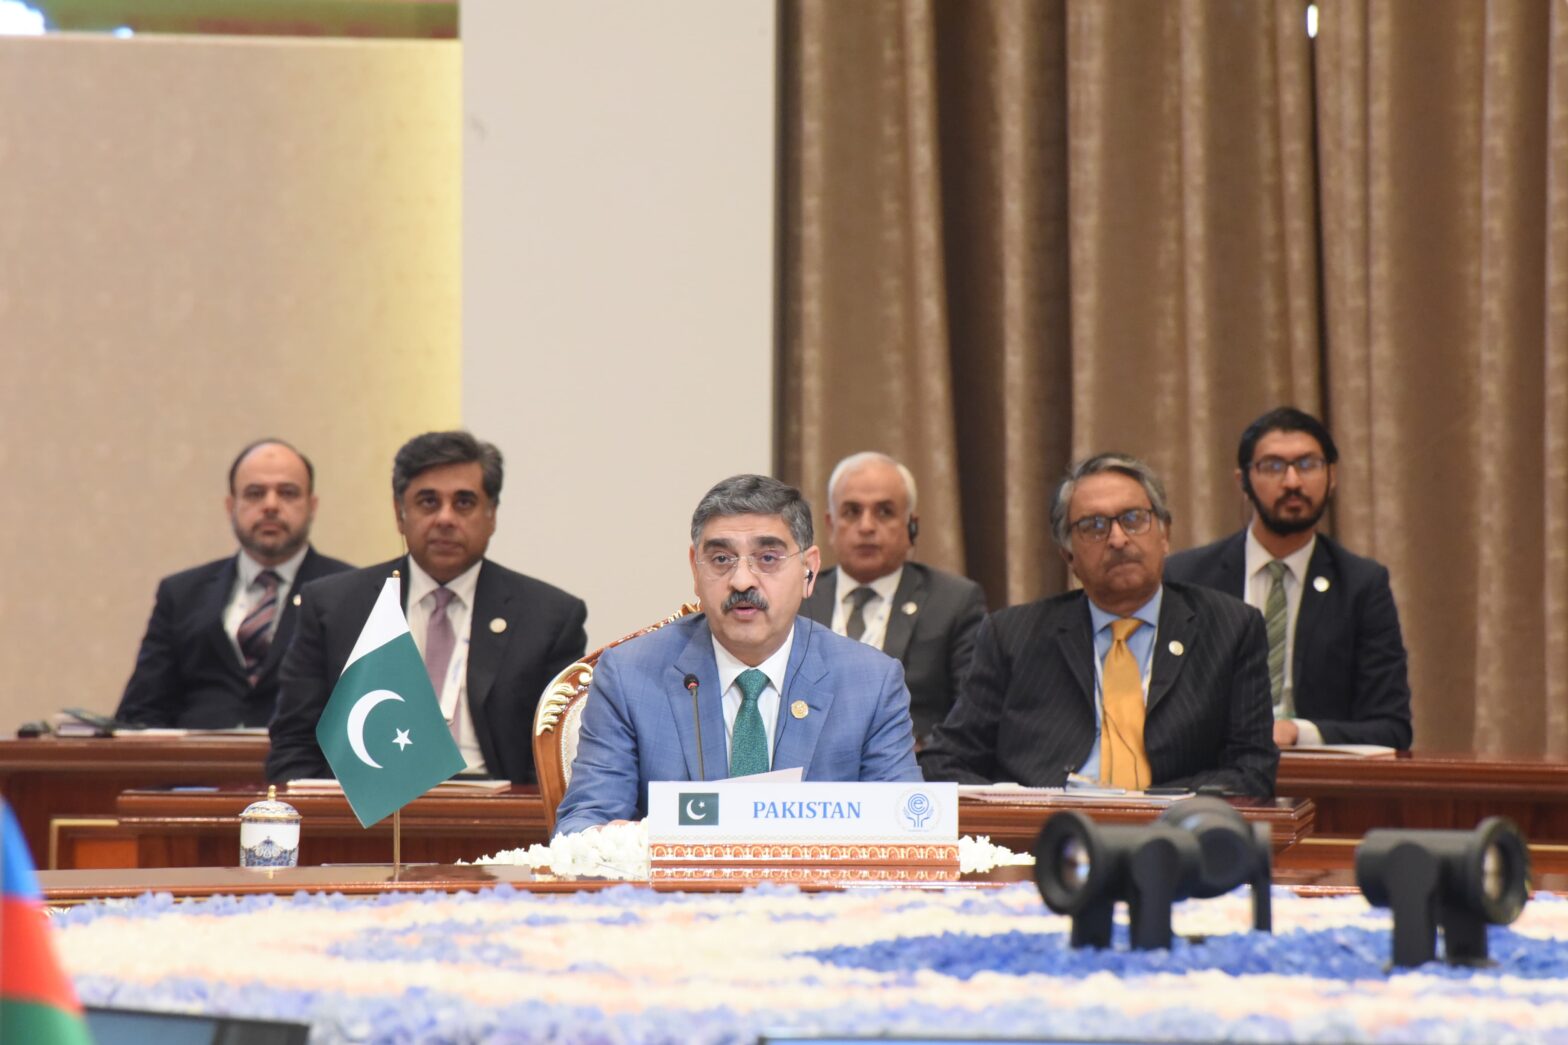 PM stresses reforms, actions to realize ECO objective for economic, peace dividends